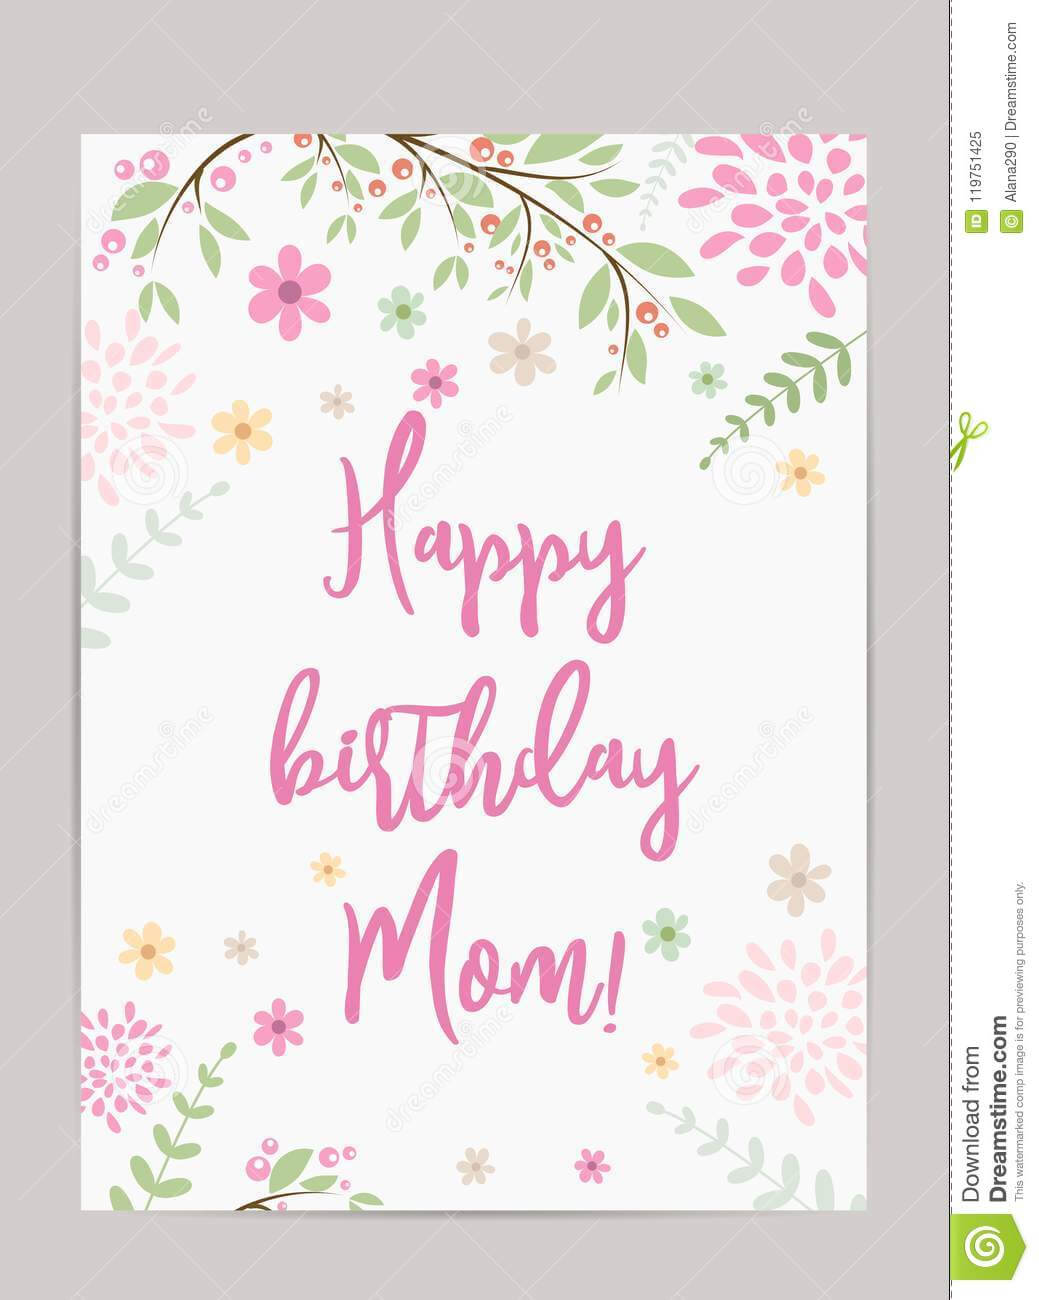 Happy Birthday Mom! Greeting Card Stock Vector With Mom Birthday Card Template